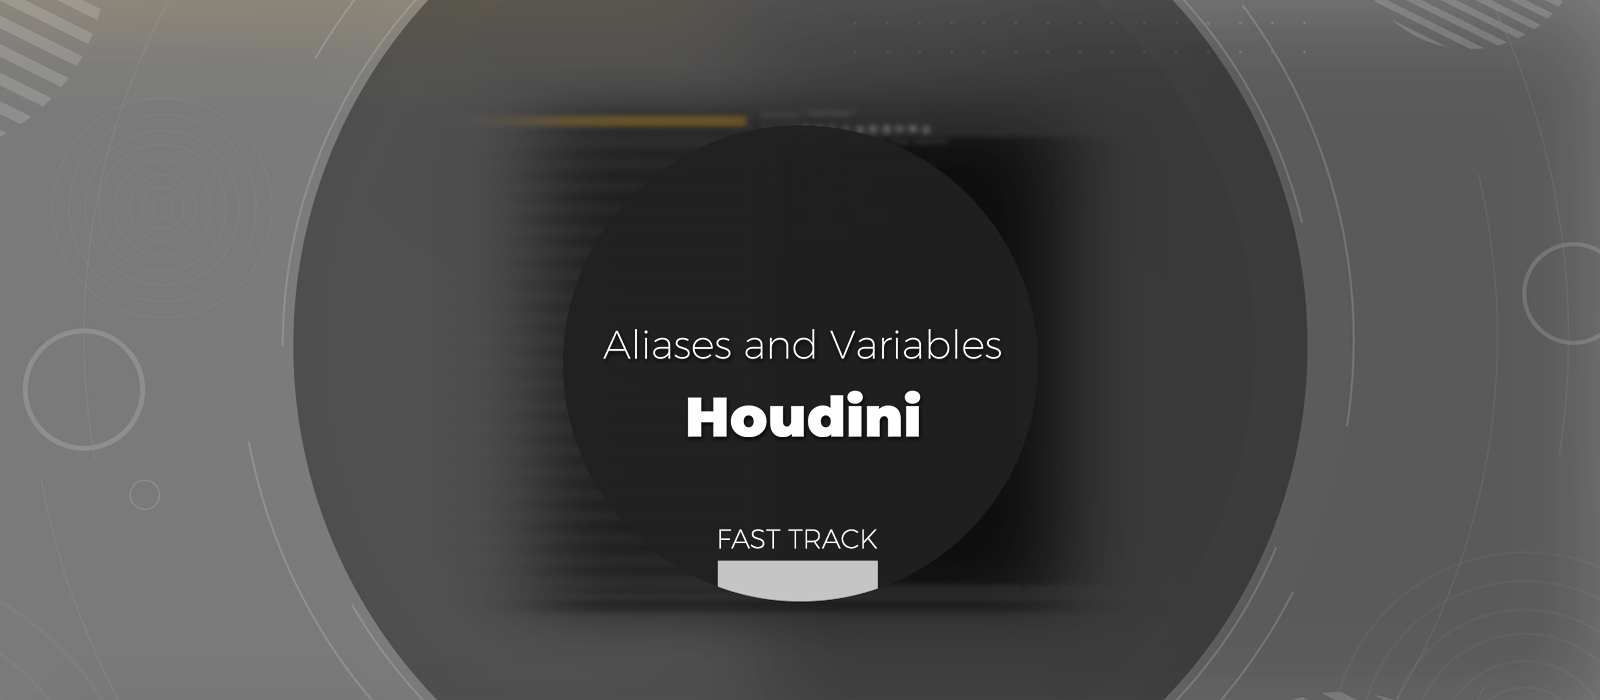 Houdini - Aliases and Variables